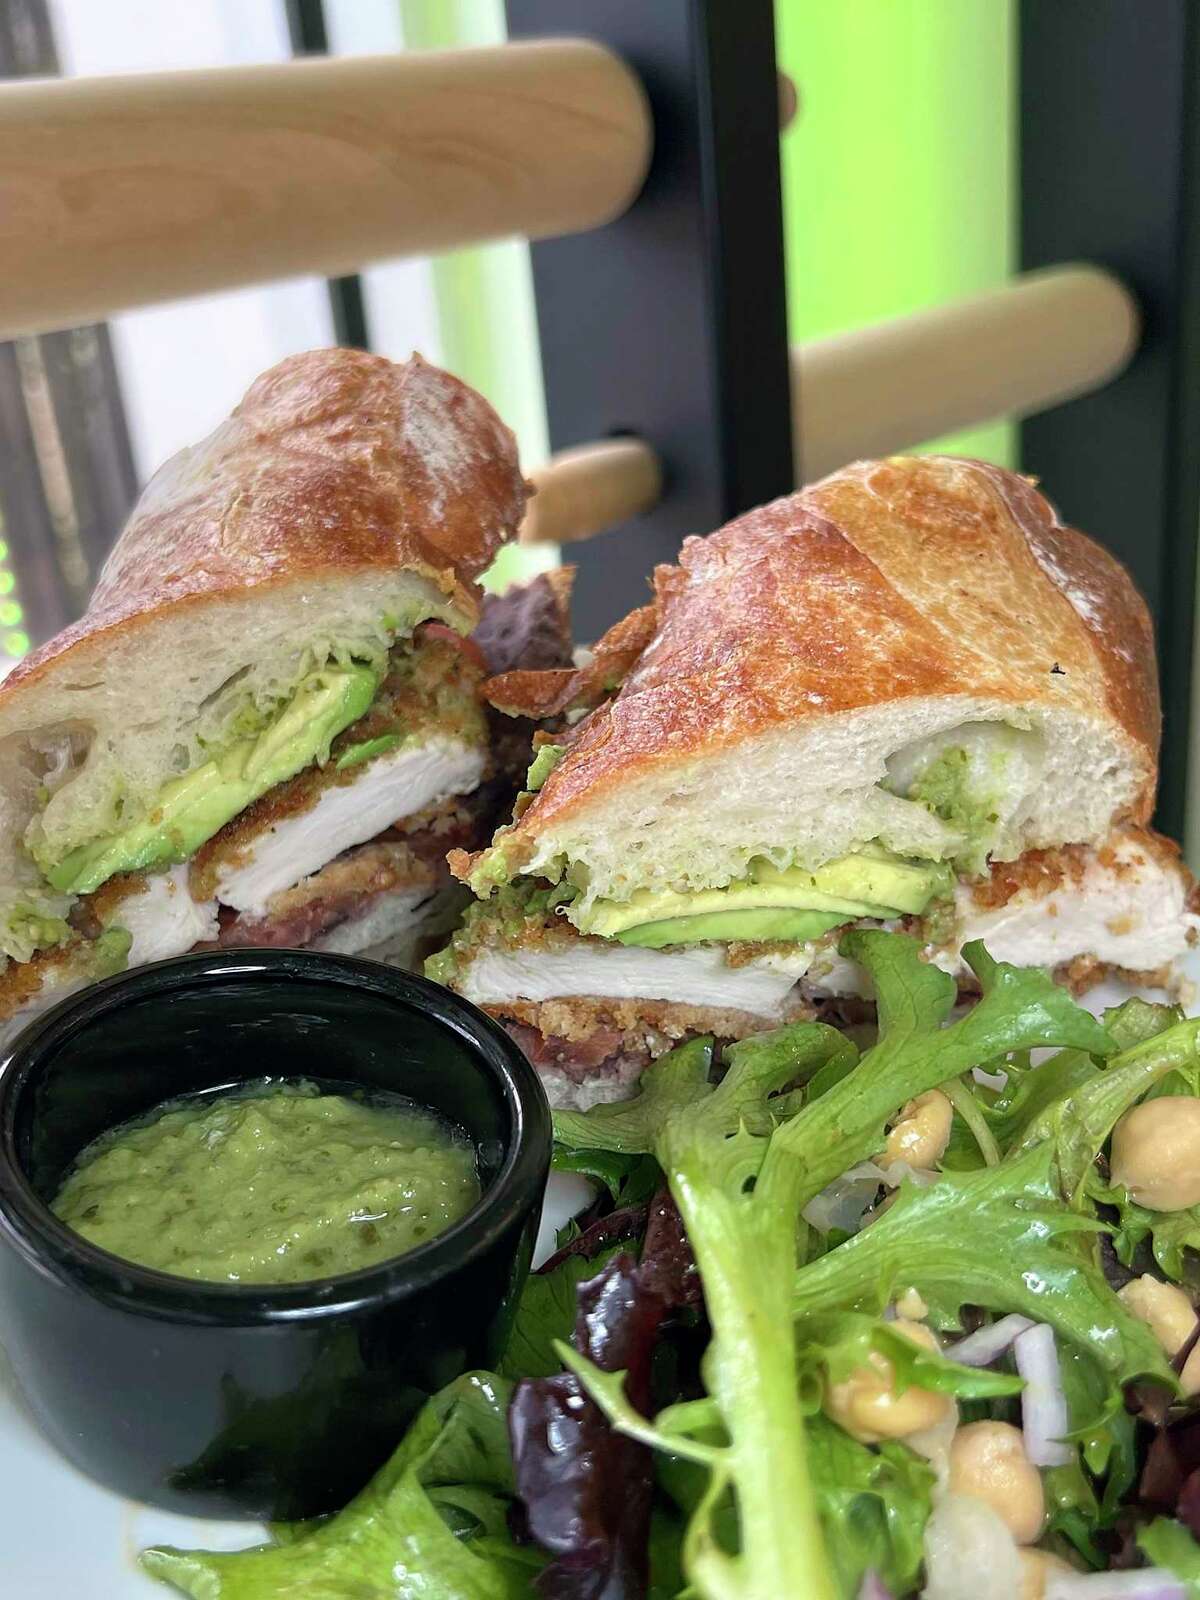 A chicken milanesa torta includes breaded chicken breast, avocado and refried beans on a fresh baguette at Pan & Coffee, a bakery, sandwich shop and coffee shop in Stone Oak.